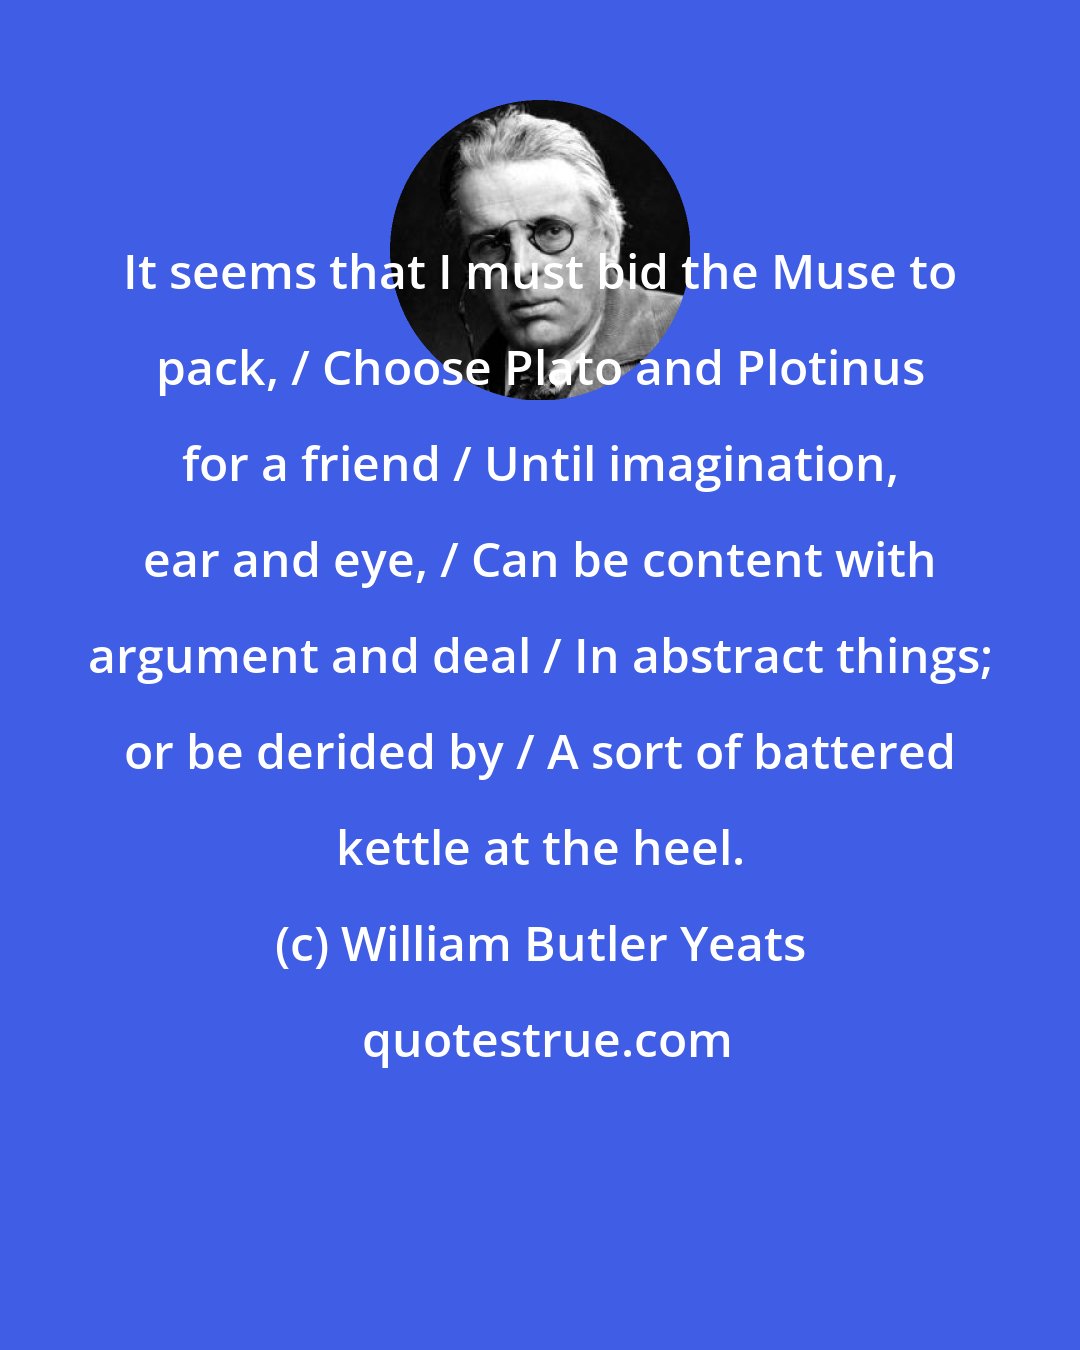 William Butler Yeats: It seems that I must bid the Muse to pack, / Choose Plato and Plotinus for a friend / Until imagination, ear and eye, / Can be content with argument and deal / In abstract things; or be derided by / A sort of battered kettle at the heel.